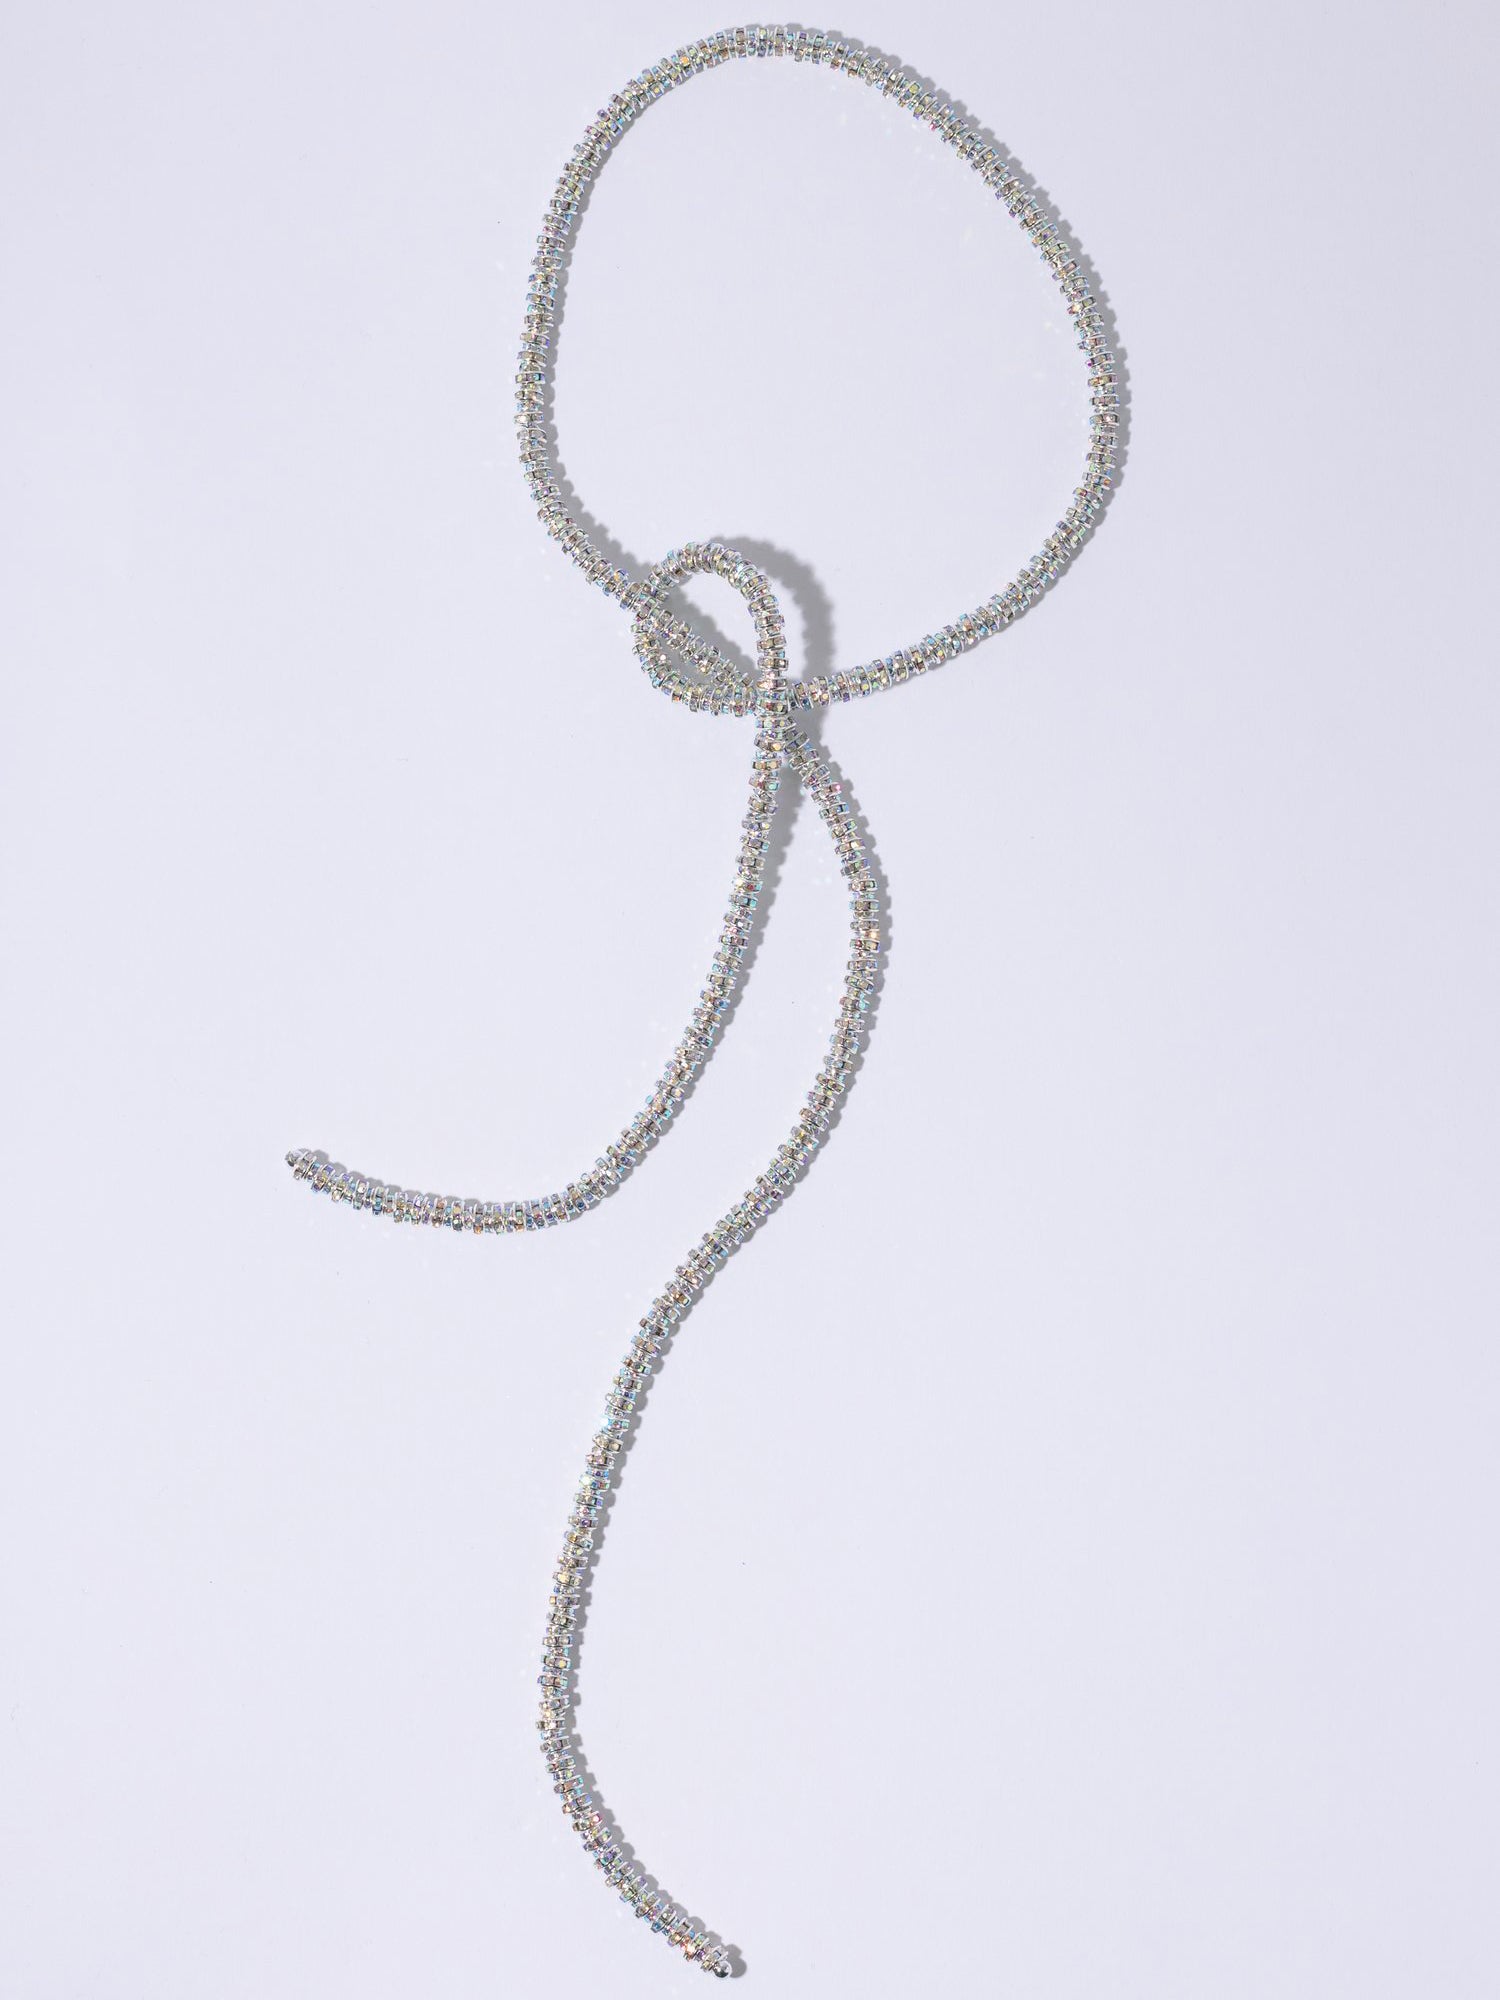 SKINNY SERPENT CHAIN necklace